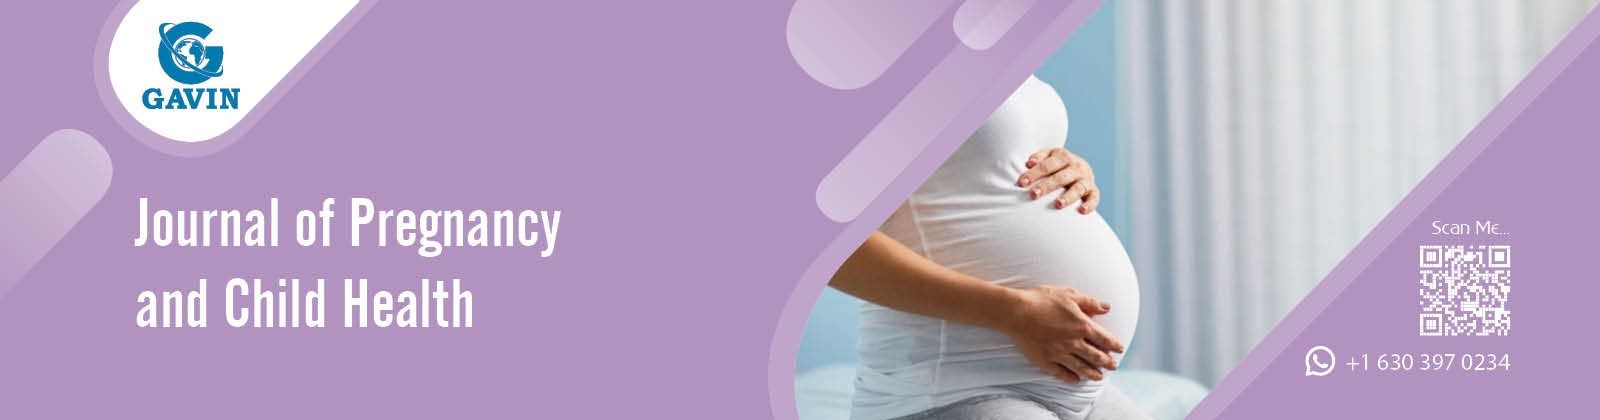 Journal of Pregnancy and Child Health